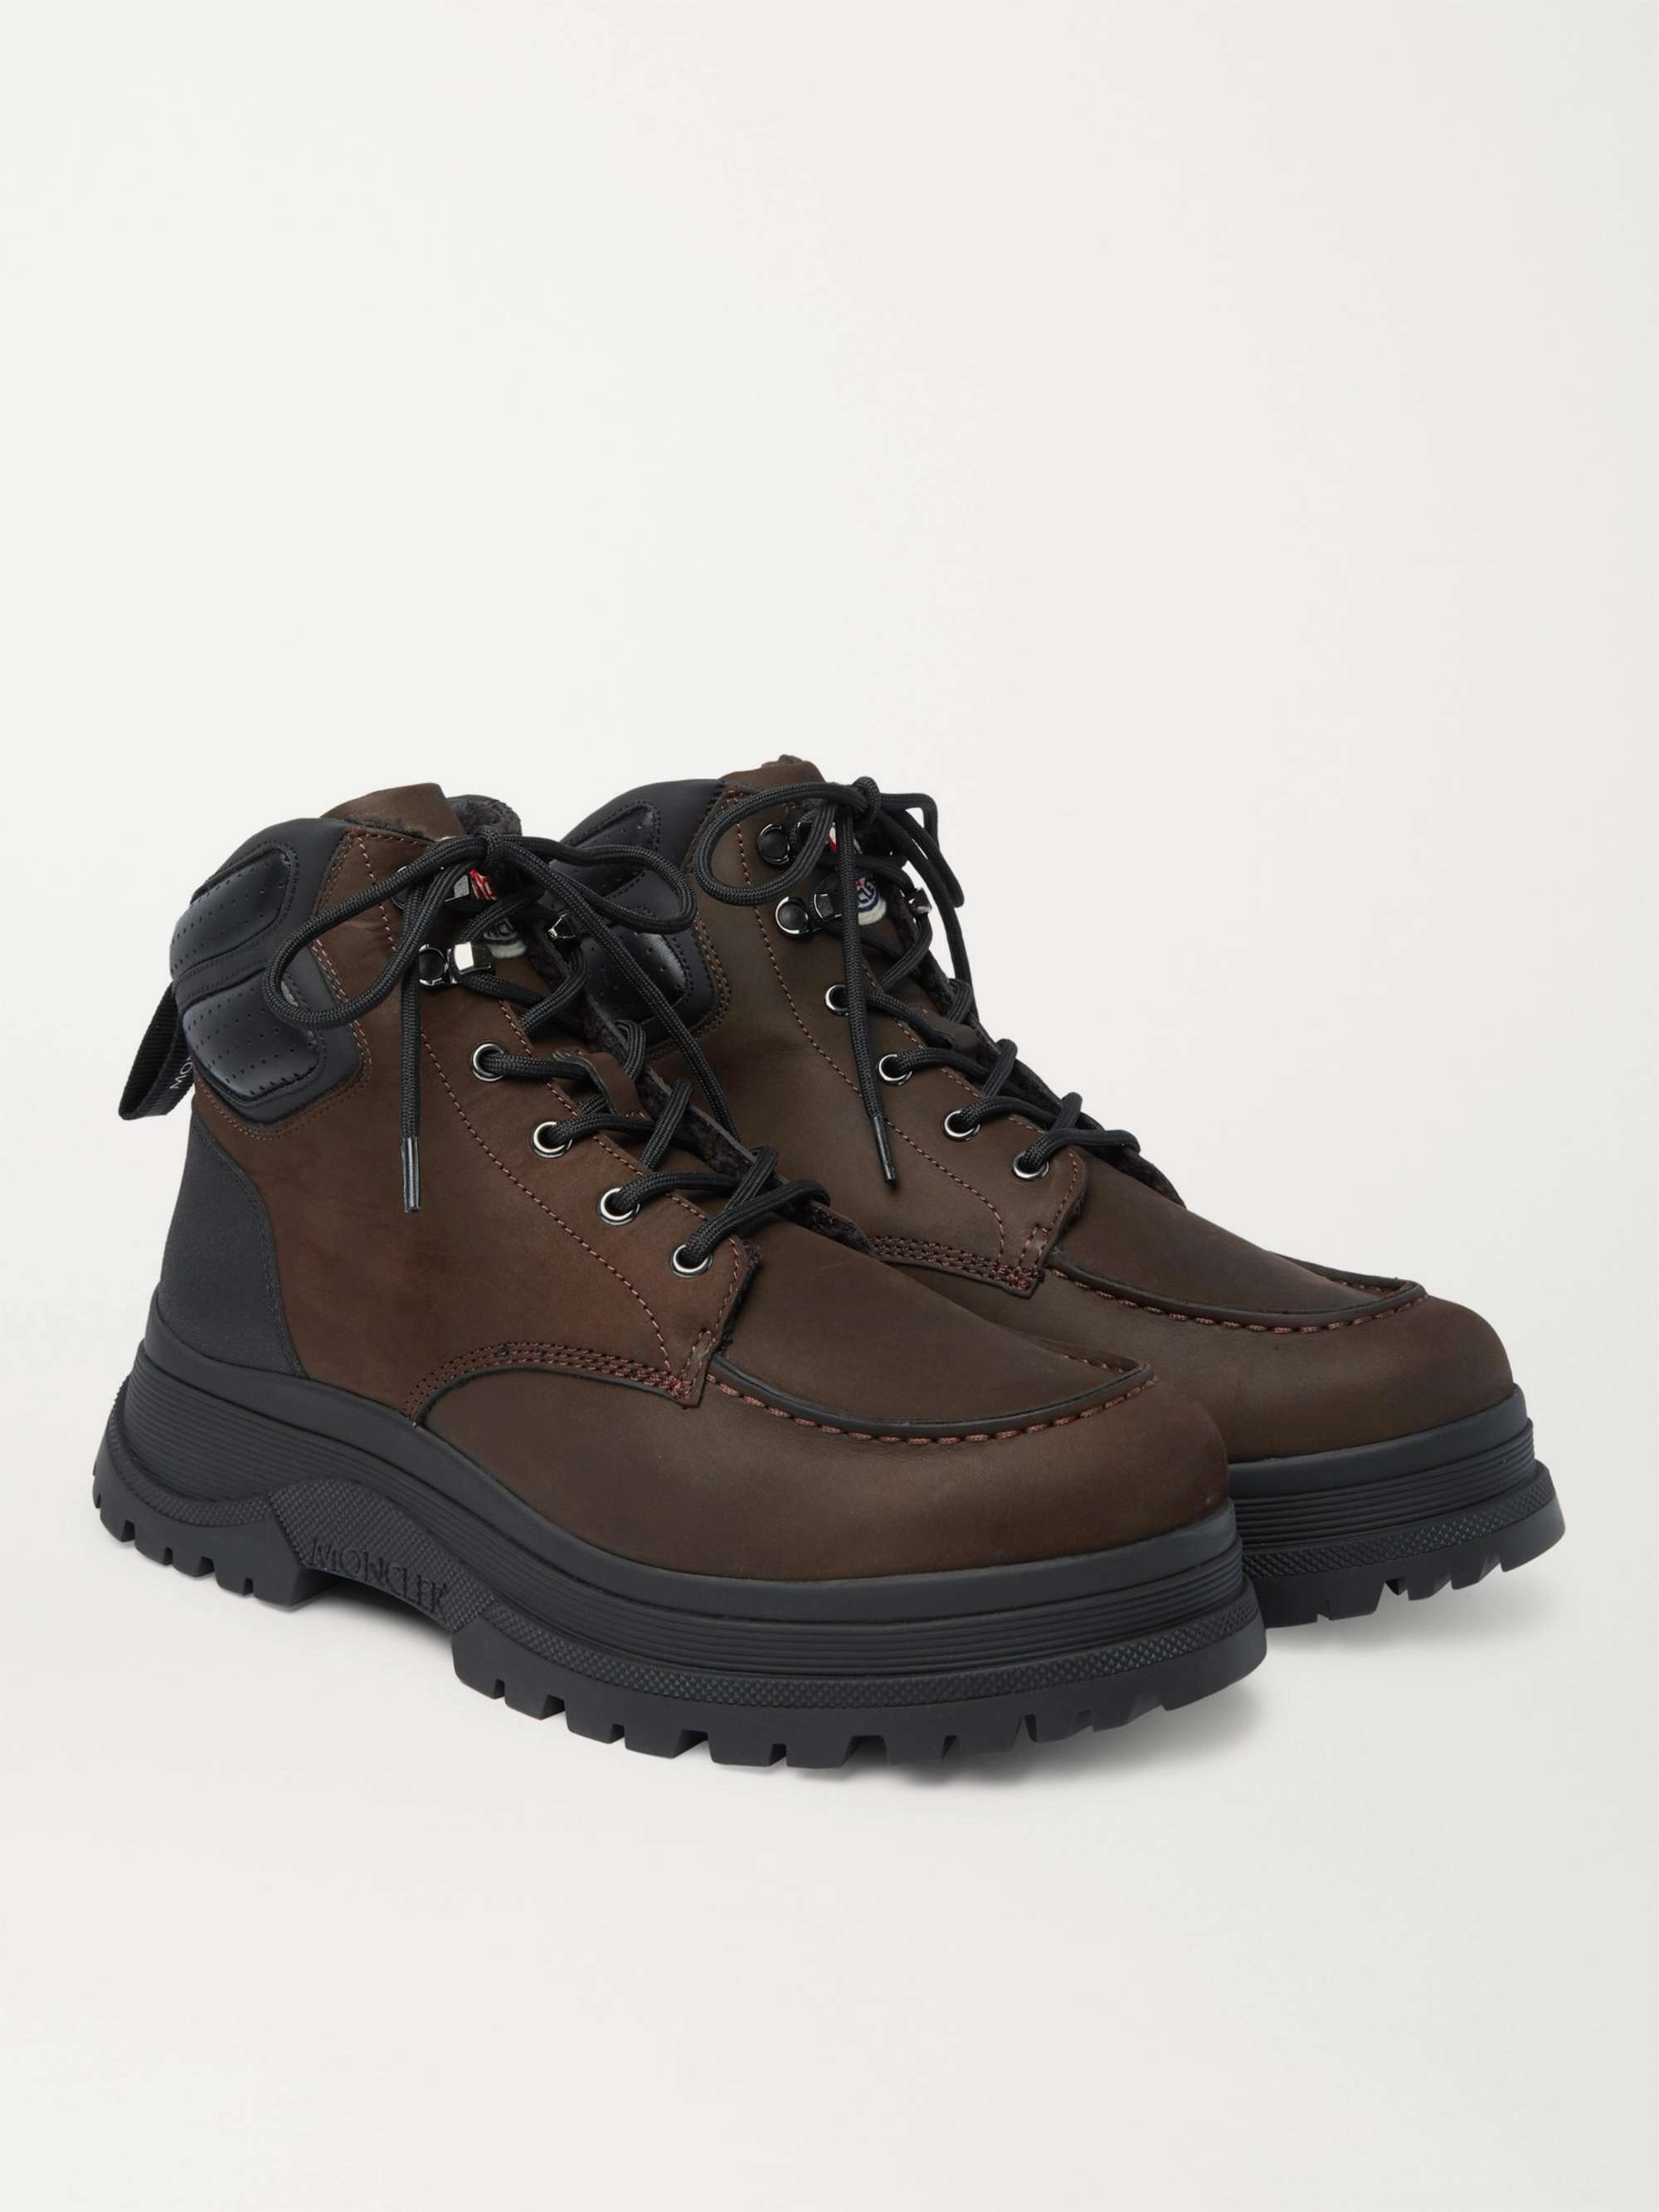 MONCLER Ulderic Leather-Trimmed Shearling-Lined Nubuck Boots